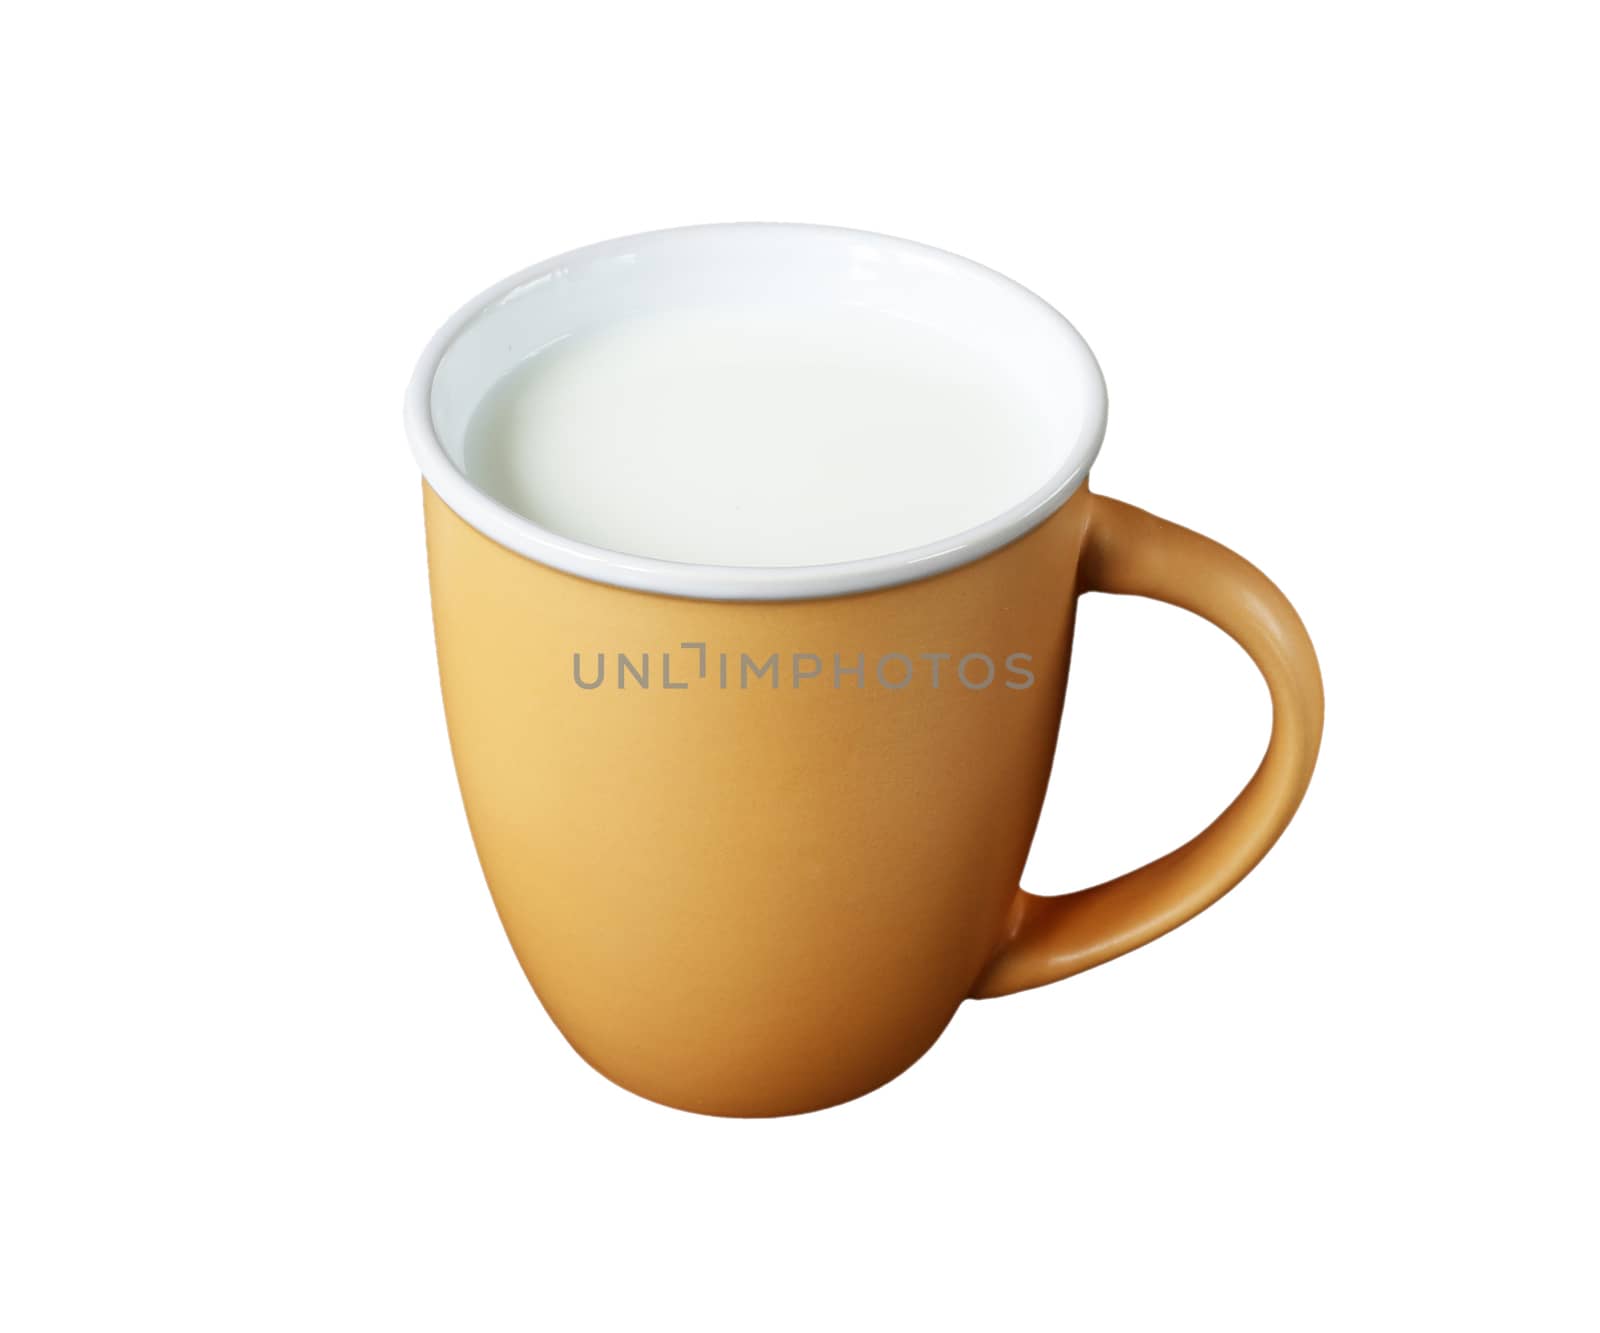 mug of clay brown color. inside poured healthy milk. isolate on white background.